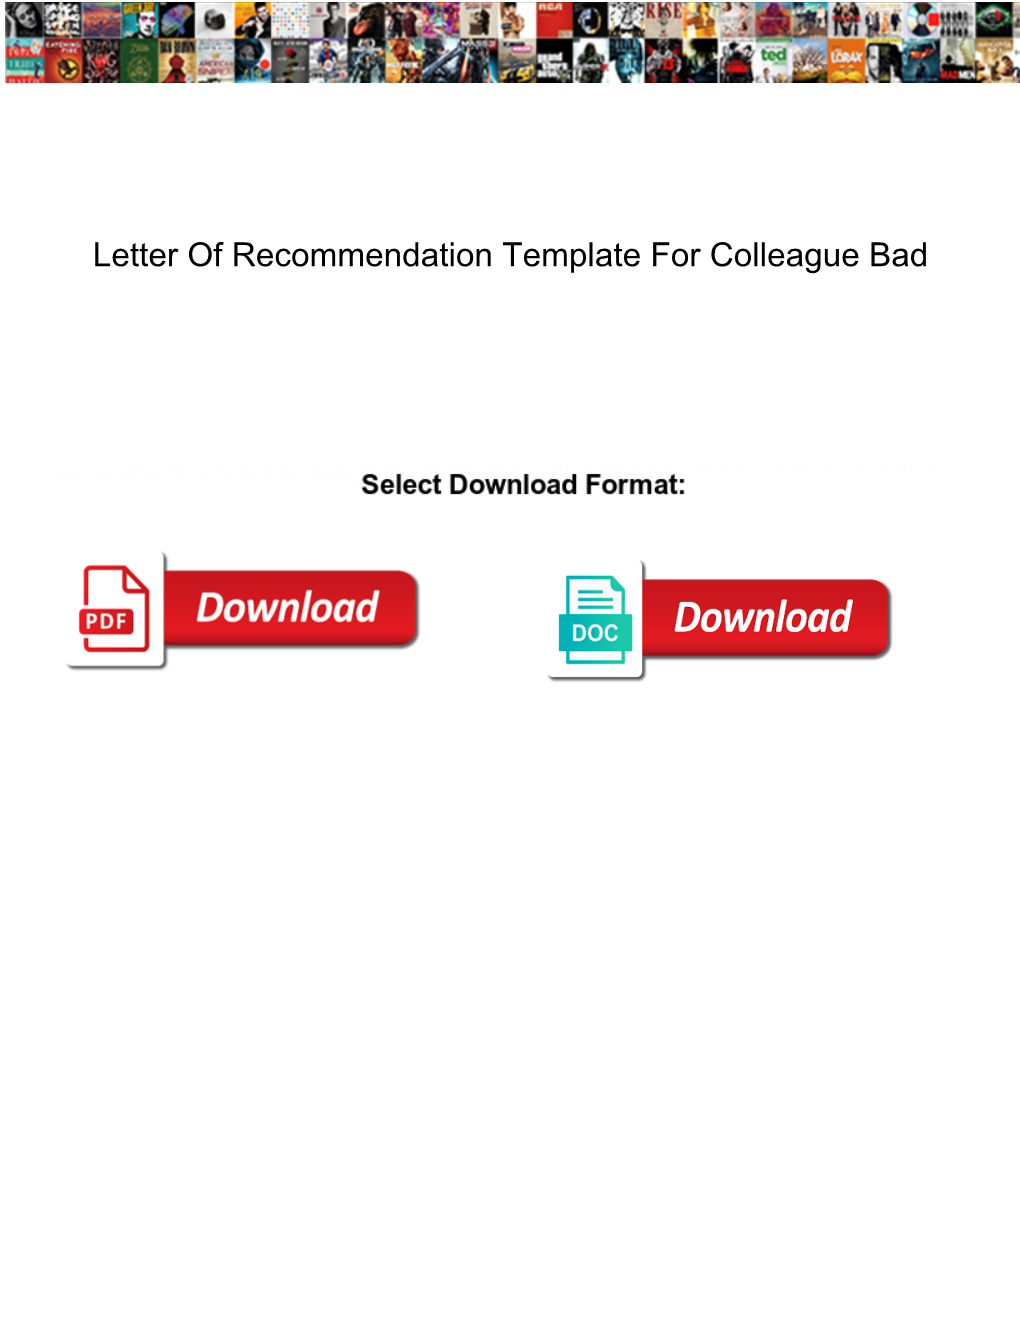 Letter of Recommendation Template for Colleague Bad